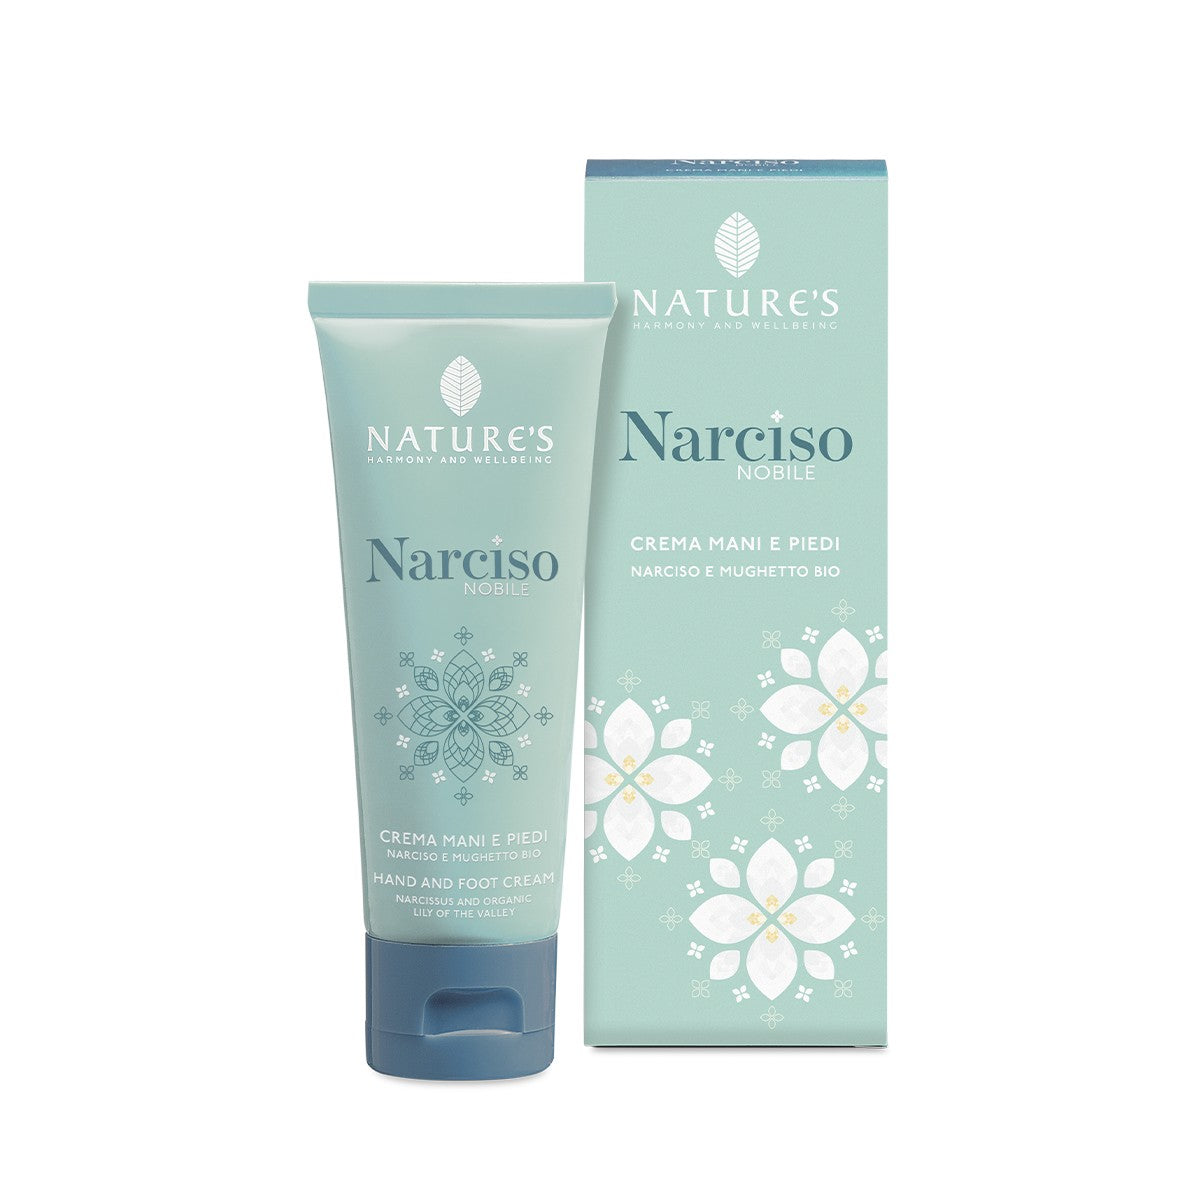 Nature's Narciso Nobile Hand and Foot Cream